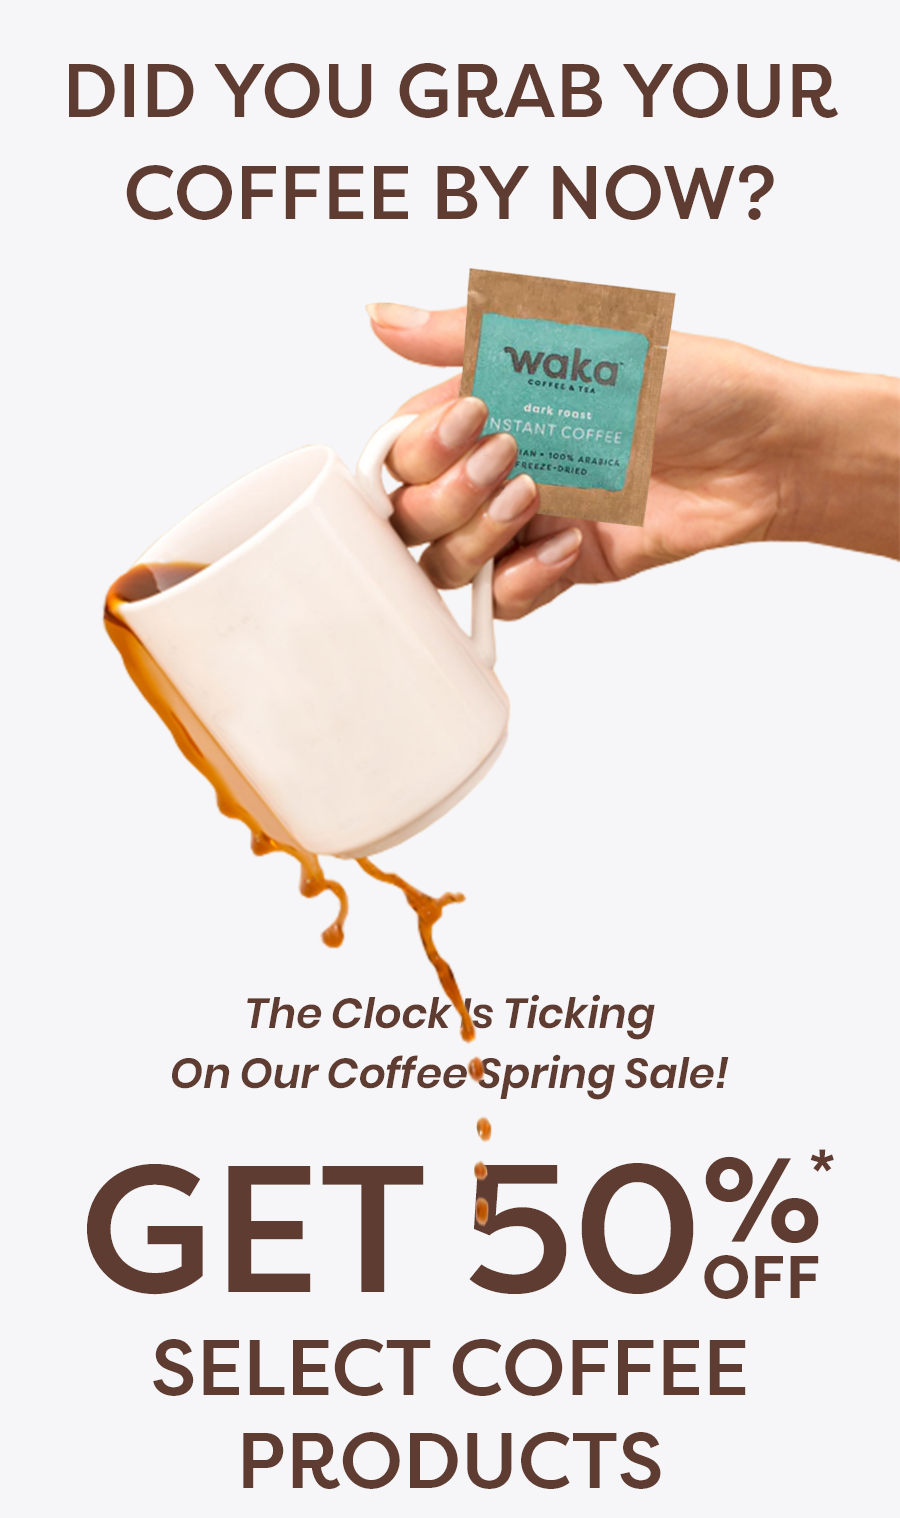 Did you grab your coffee by now? | The Clock Ticking On Our Coffee Spring Sale! Get 50%* Off Select Coffee Products